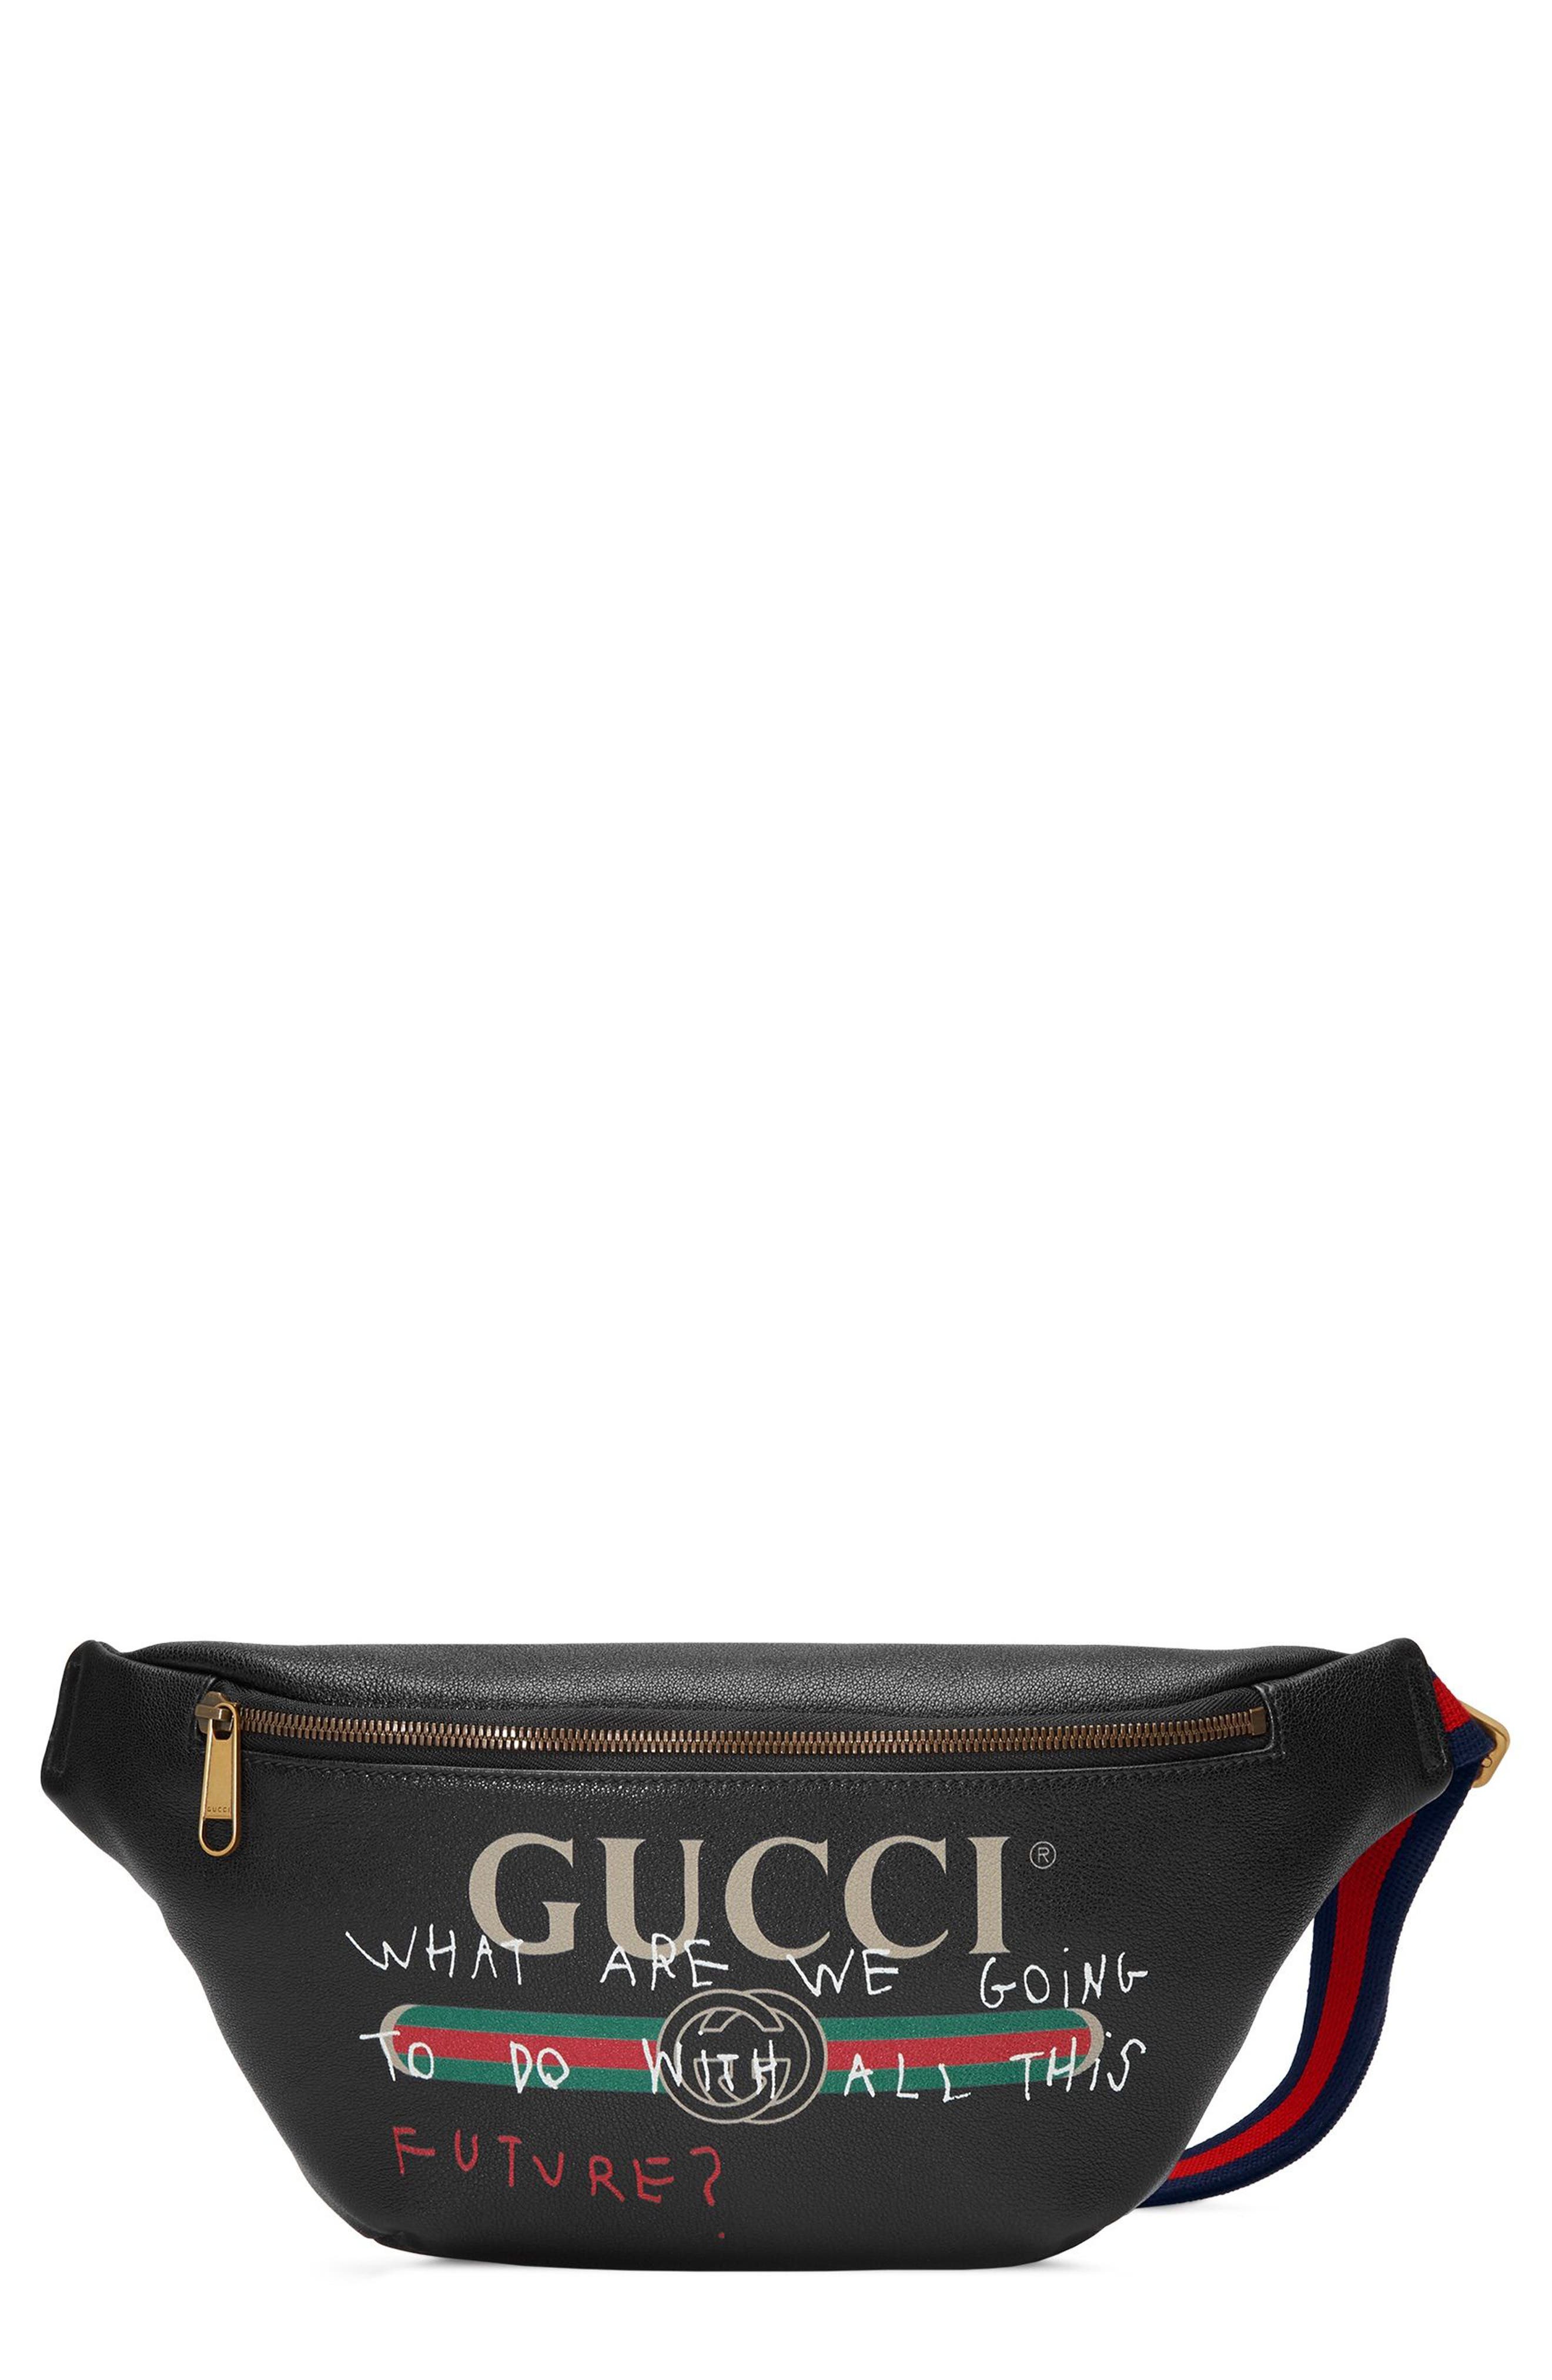 gucci fanny pack with writing